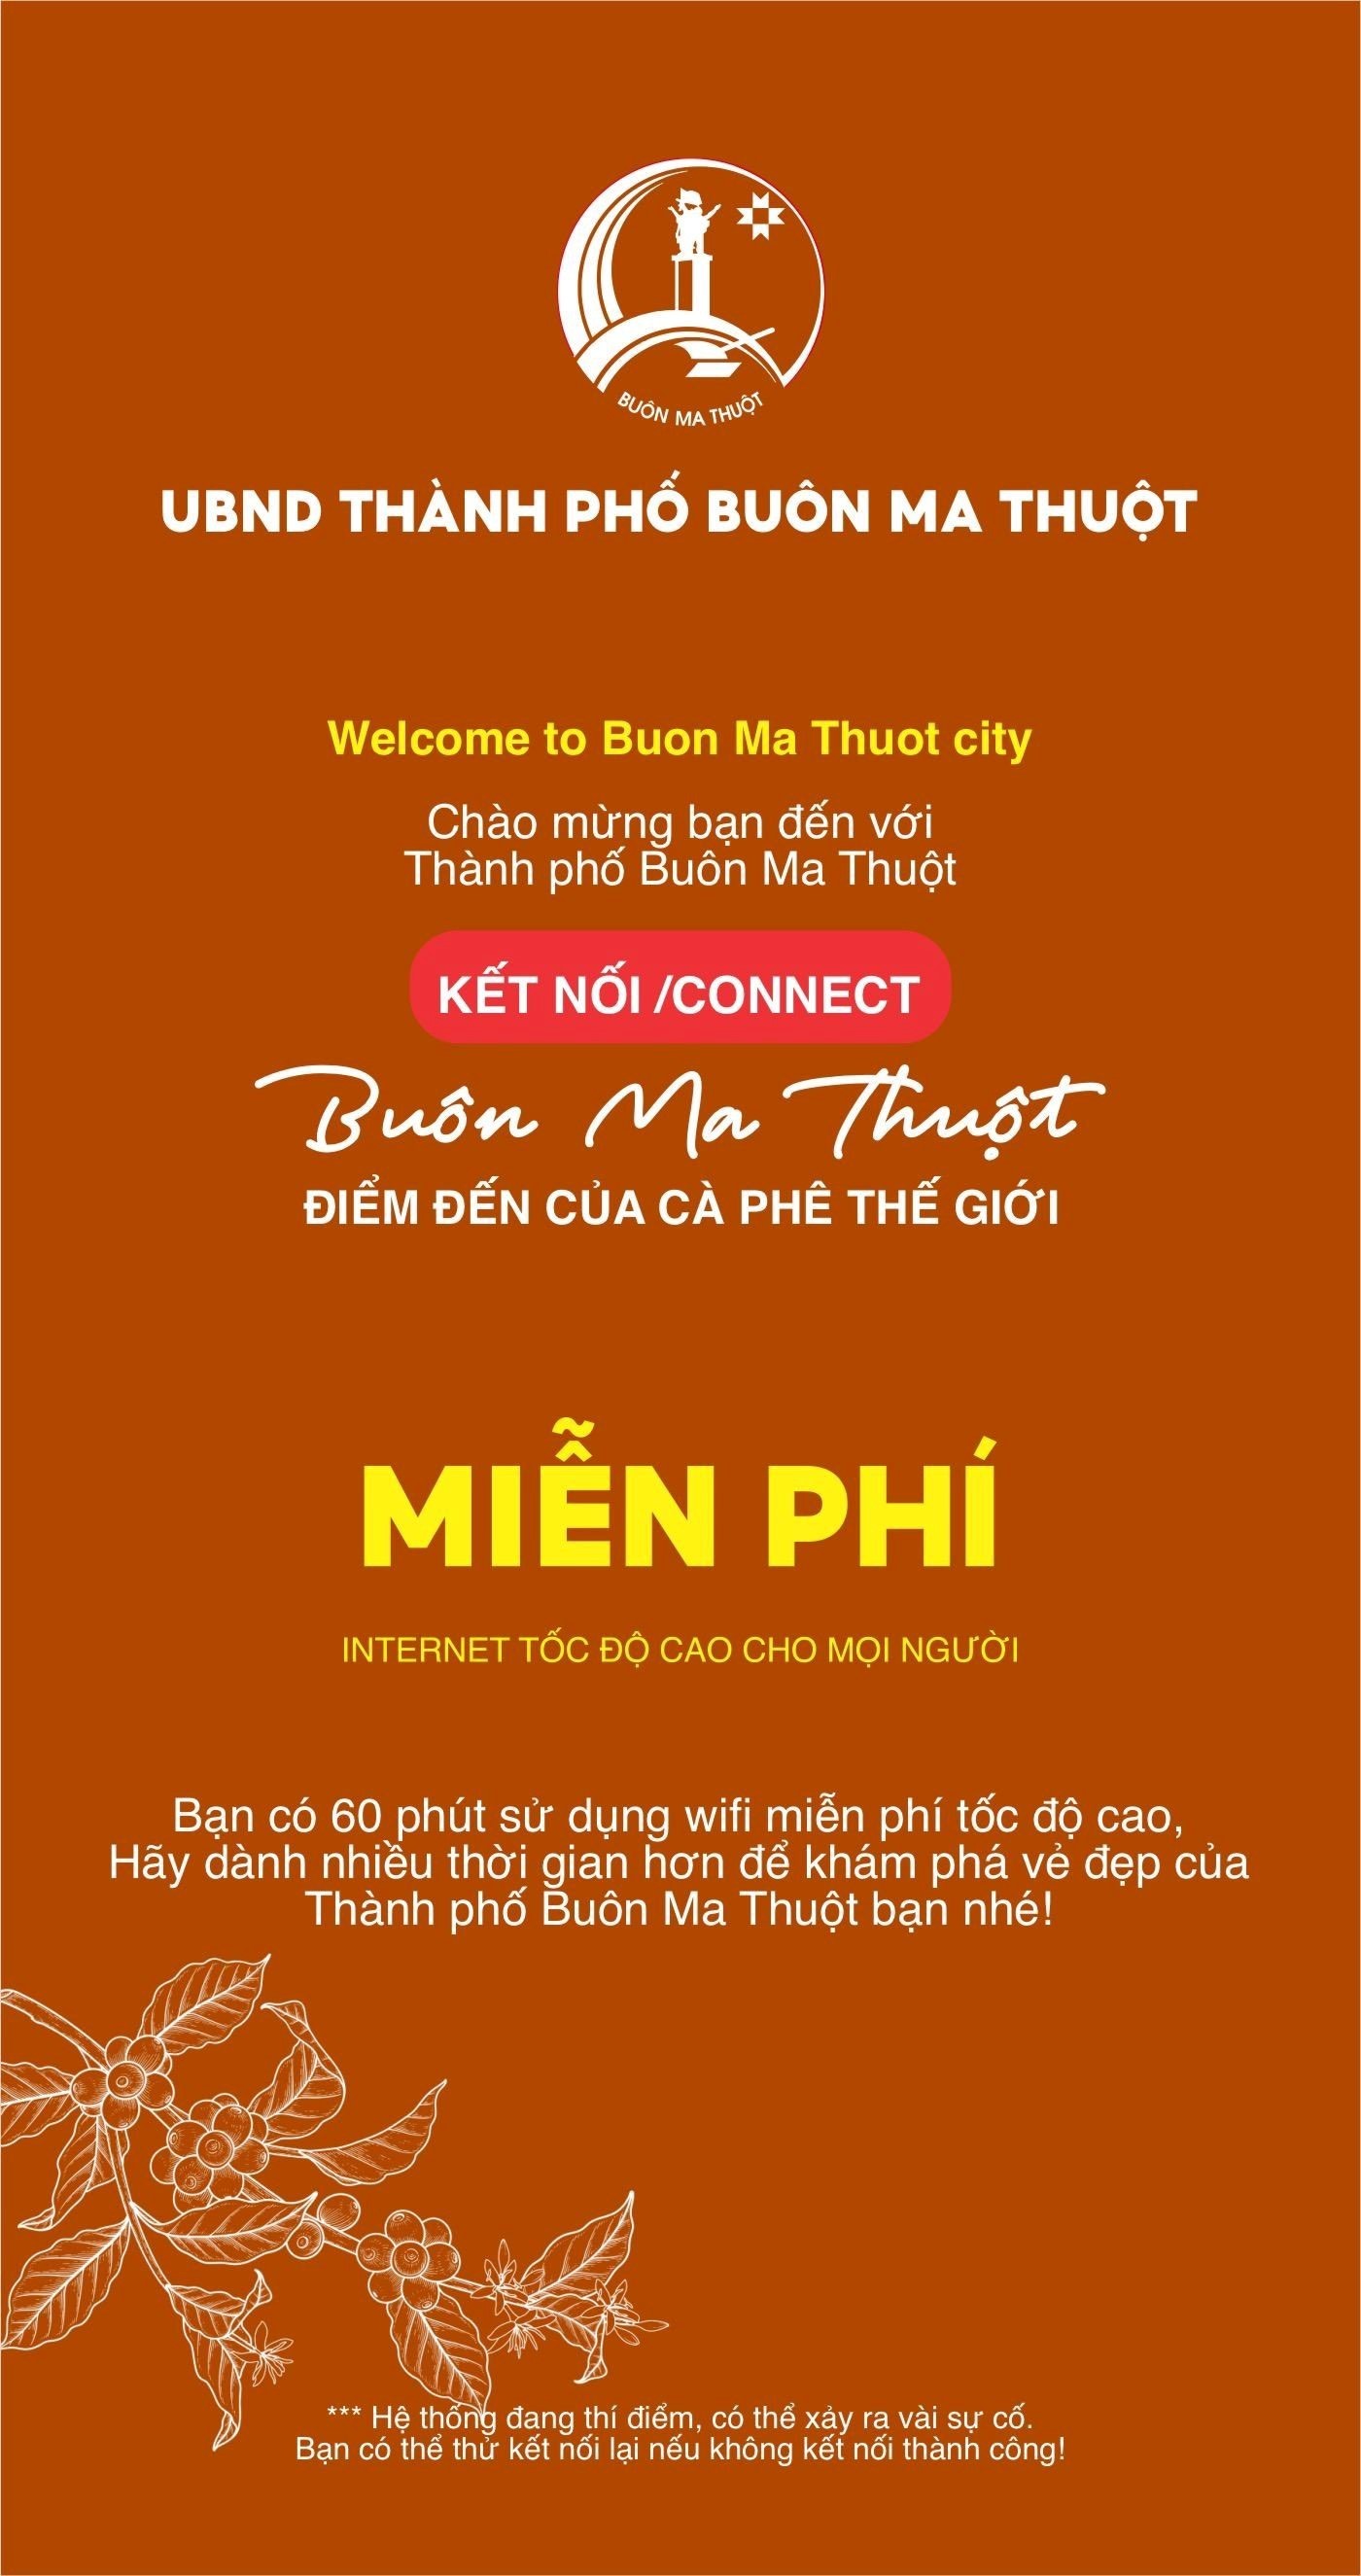 Buon Ma Thuot City Provides Free Wifi Coverage on Phan Dinh Giot Street for Tourists